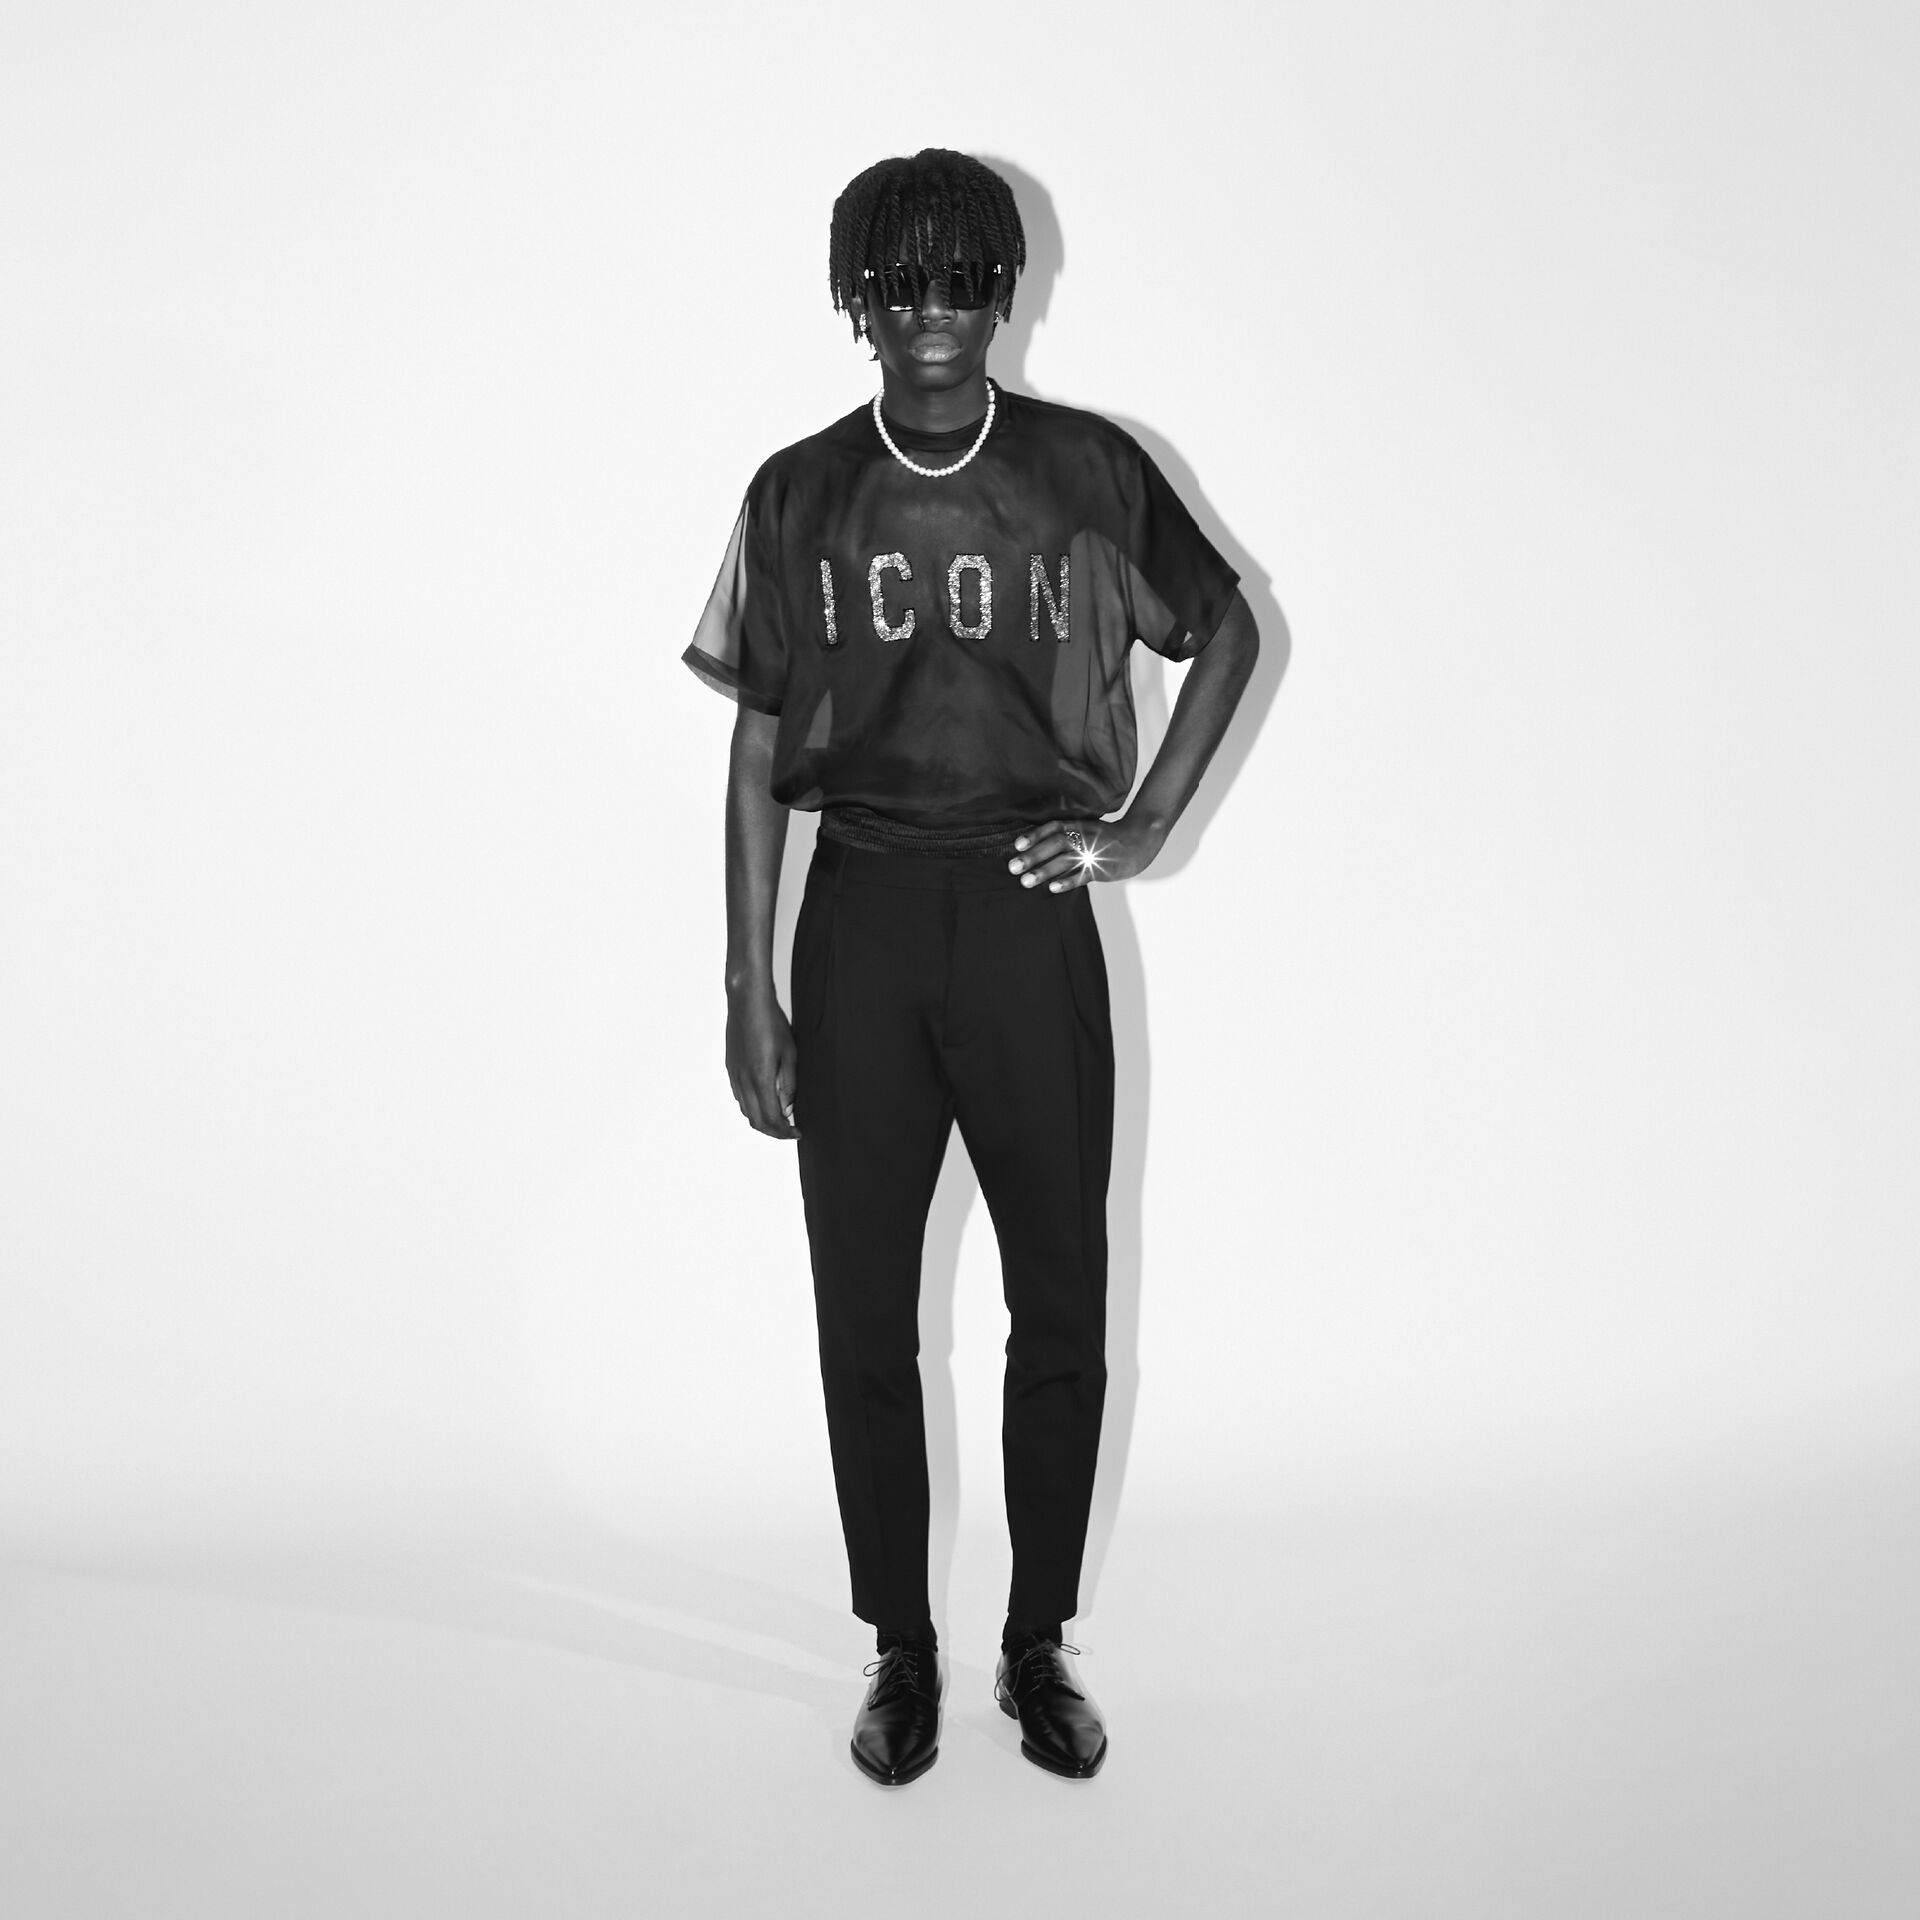 Picture in black and white of a man wearing a transparent black t-shirt with ICON logo on it and black classic pants